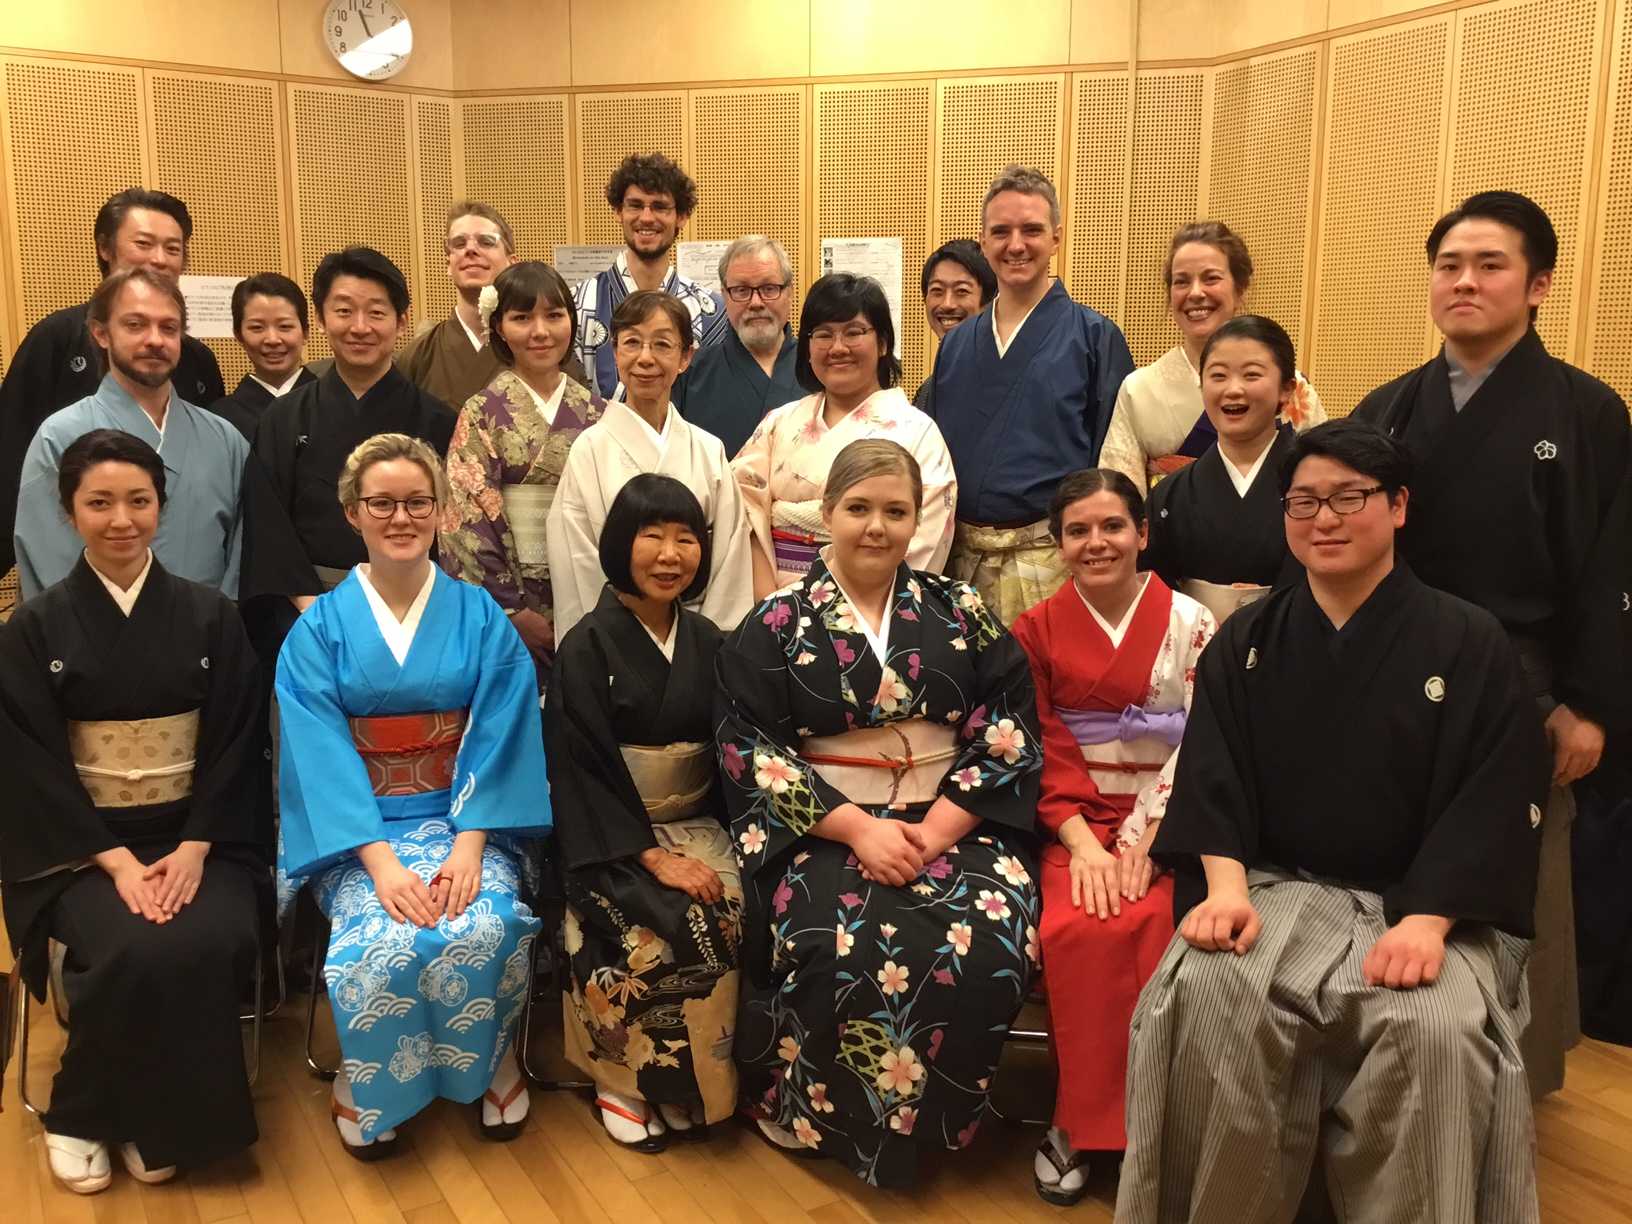 Group photo of musicians at MIFA festival shamisen concert.